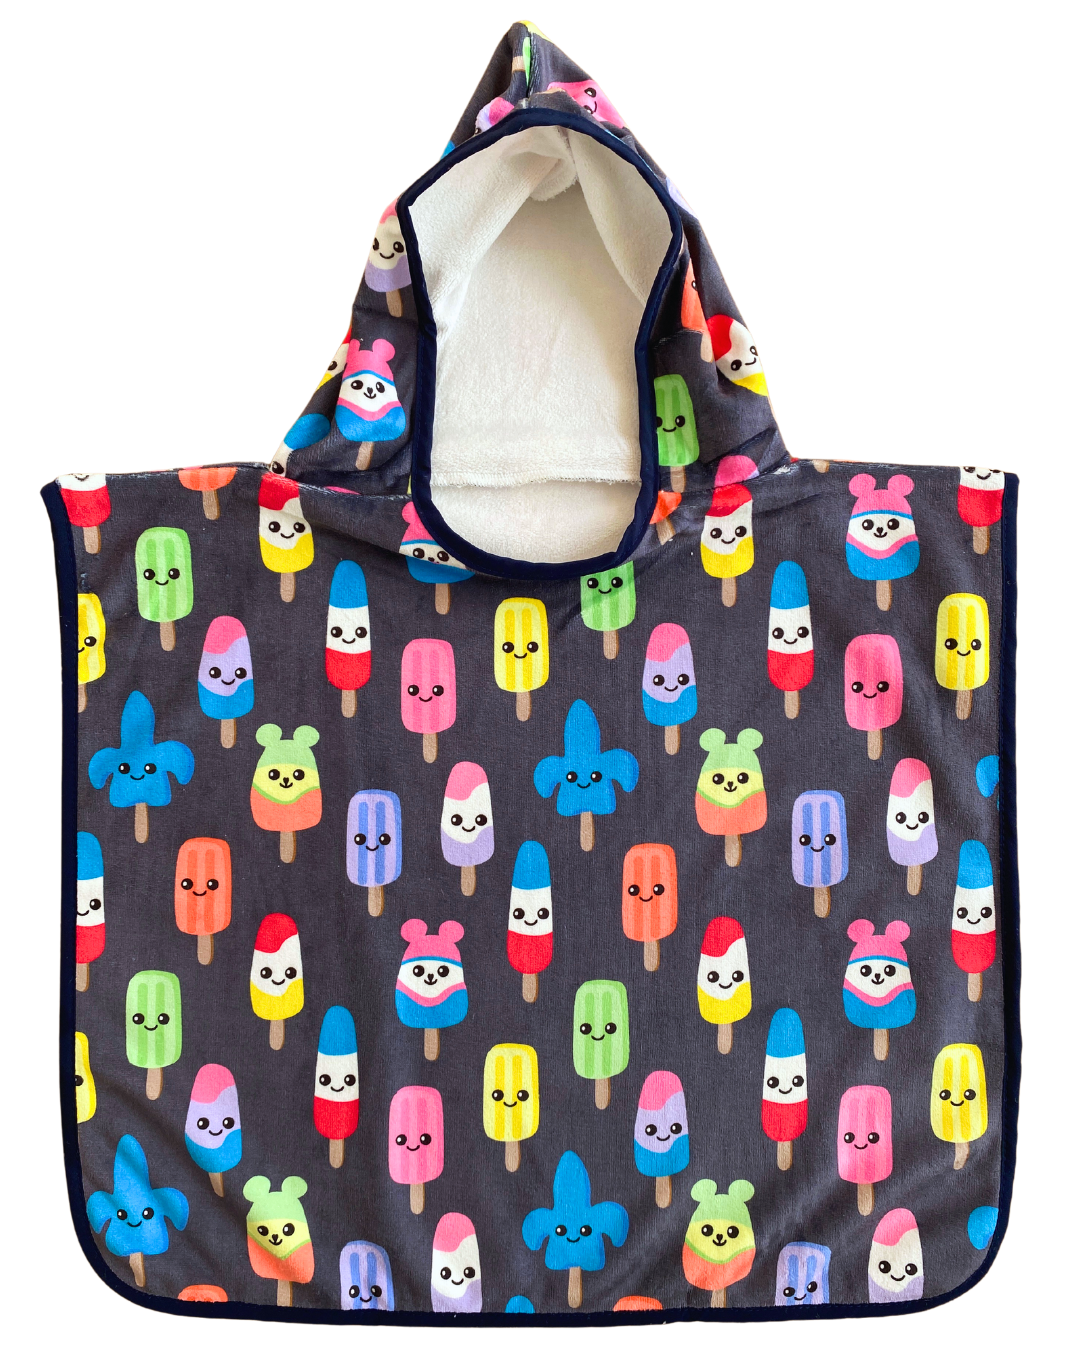 Hooded Baby Towel (0-18 months): Popsicle buffet